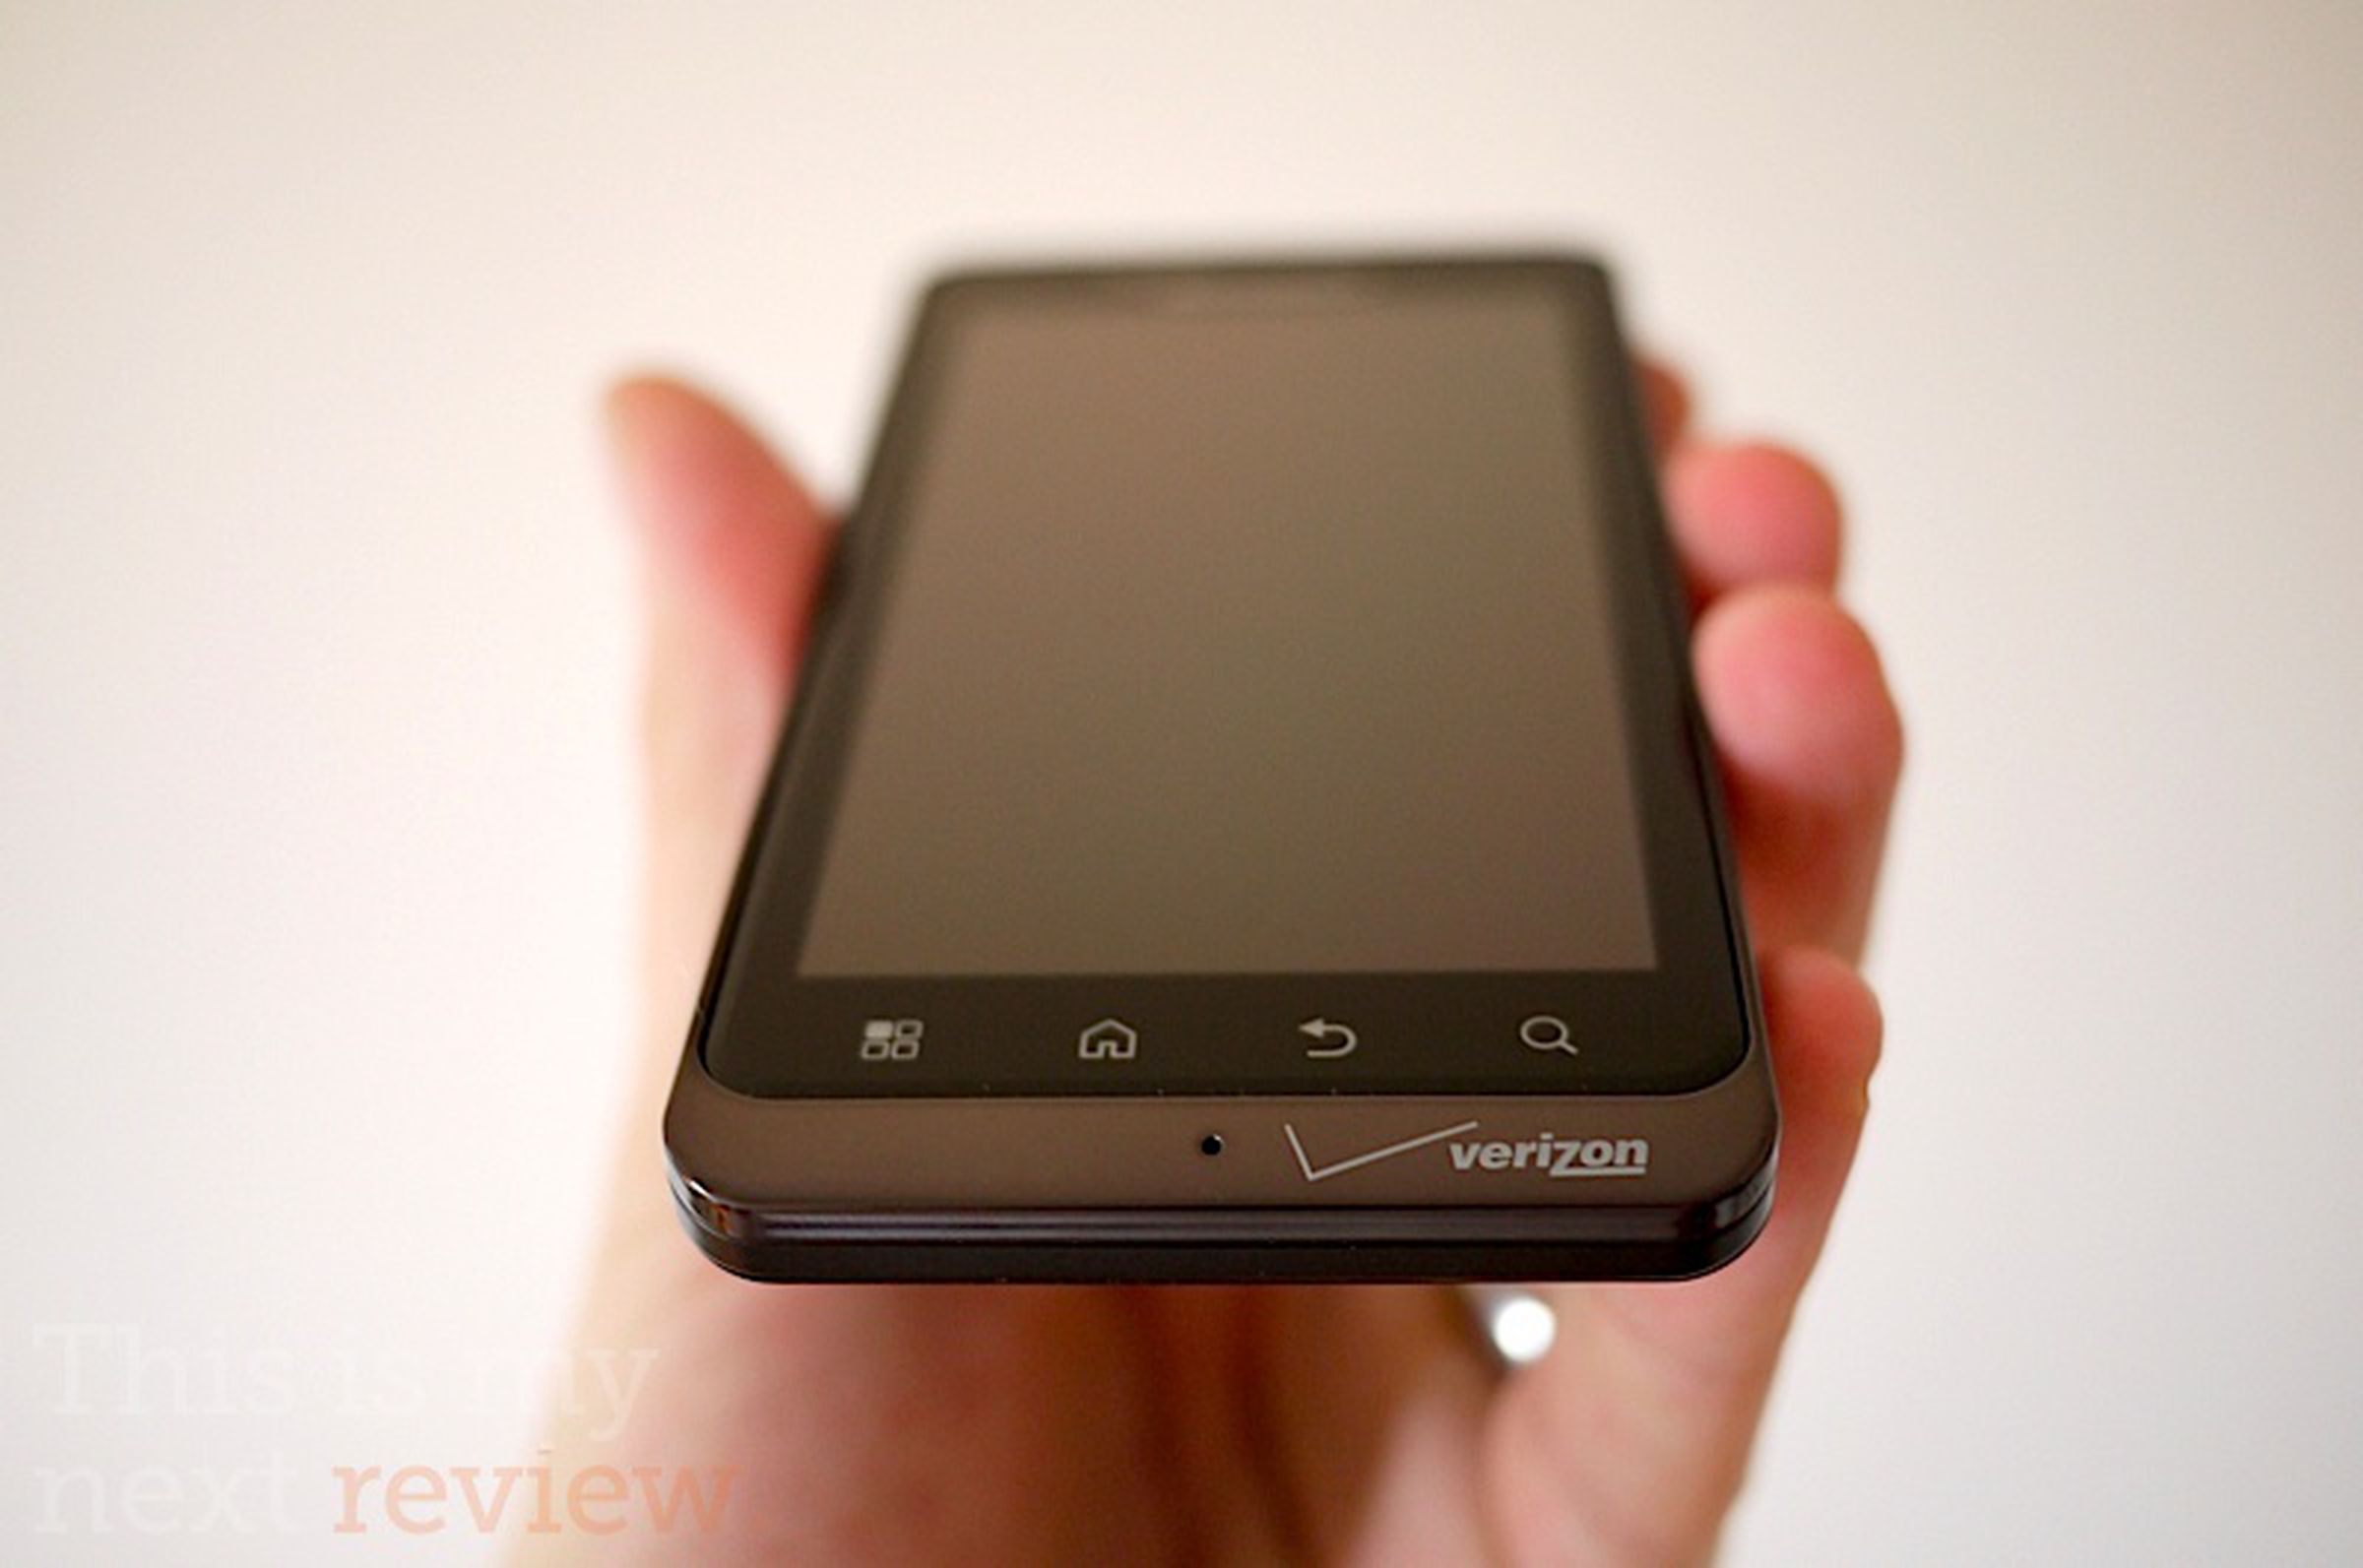 Droid Bionic review pictures